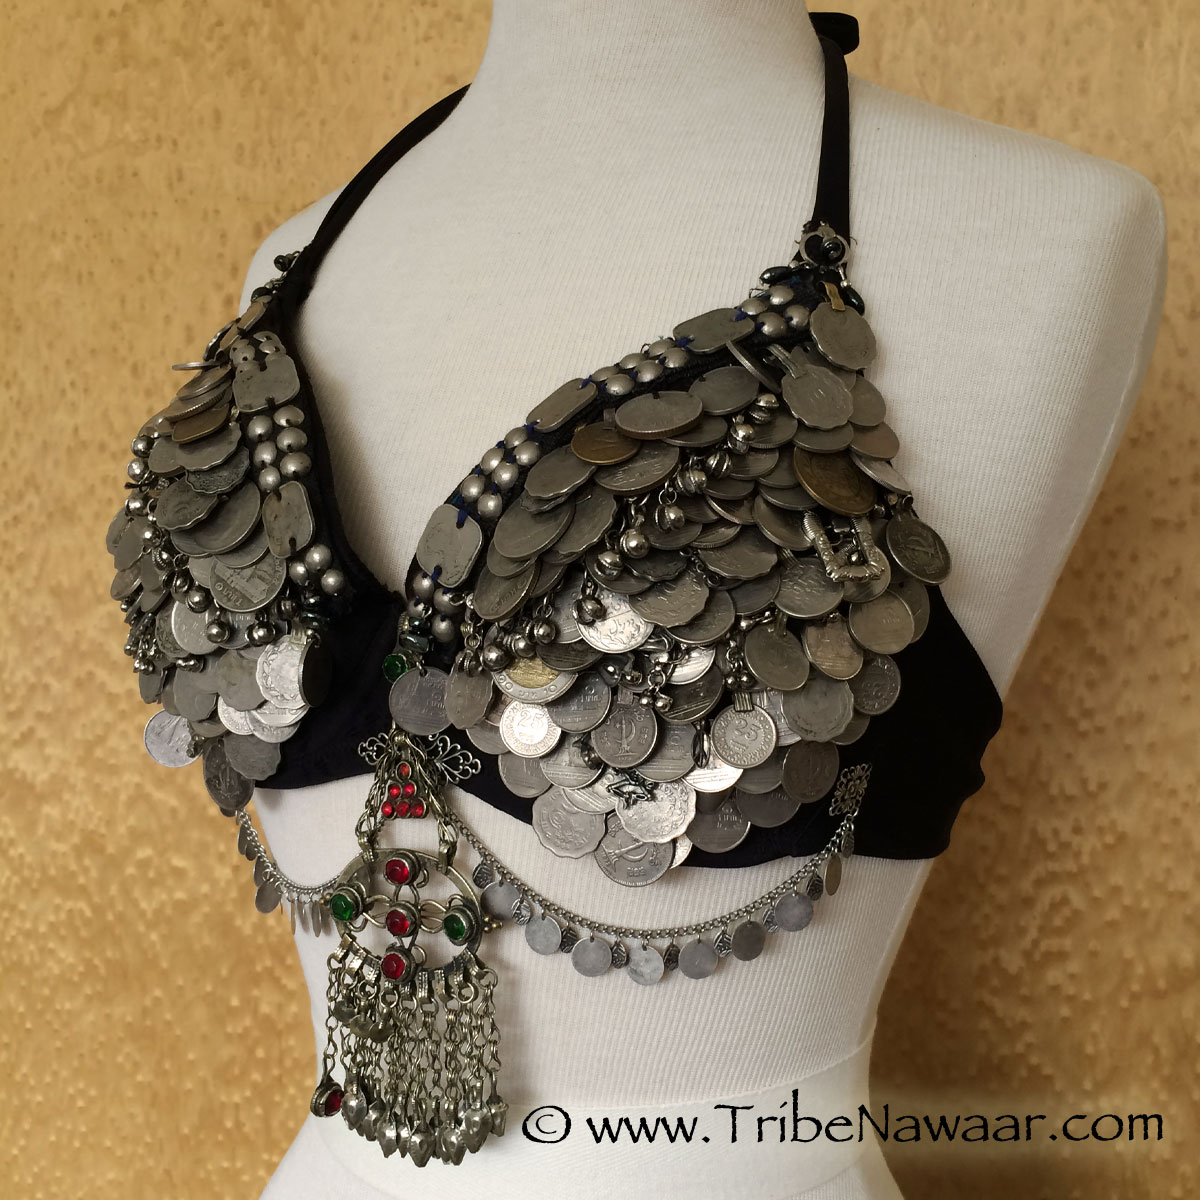 Learn to make your own DIY tribal bellydance coin bra in Tribe Nawaar's Bra Decorating Workshop, Boulder, Colorado